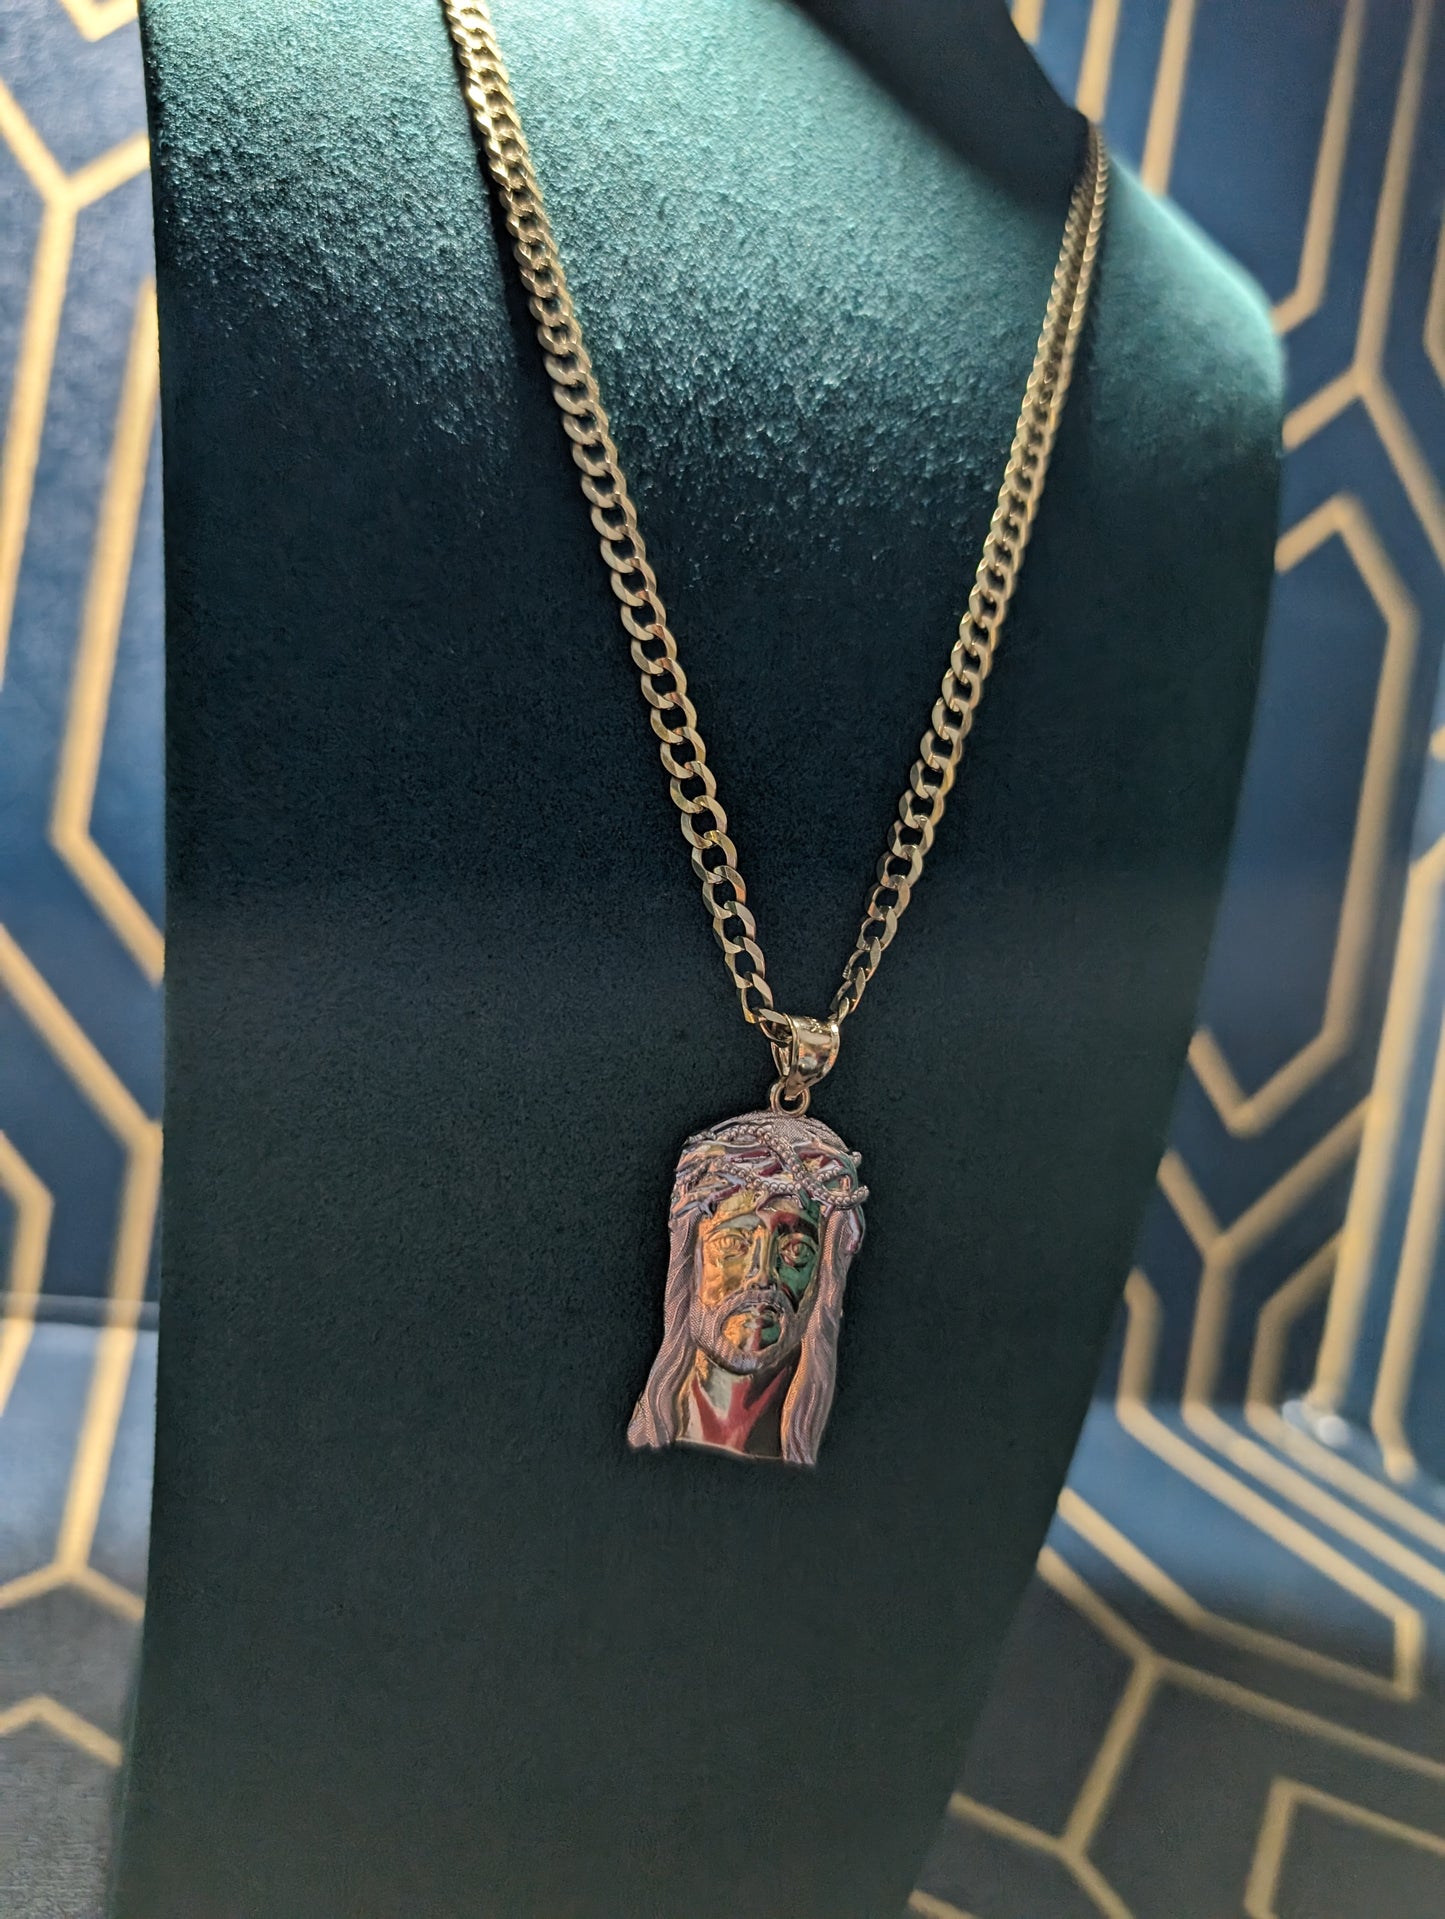 14k Cuban Chain with Jesus Face